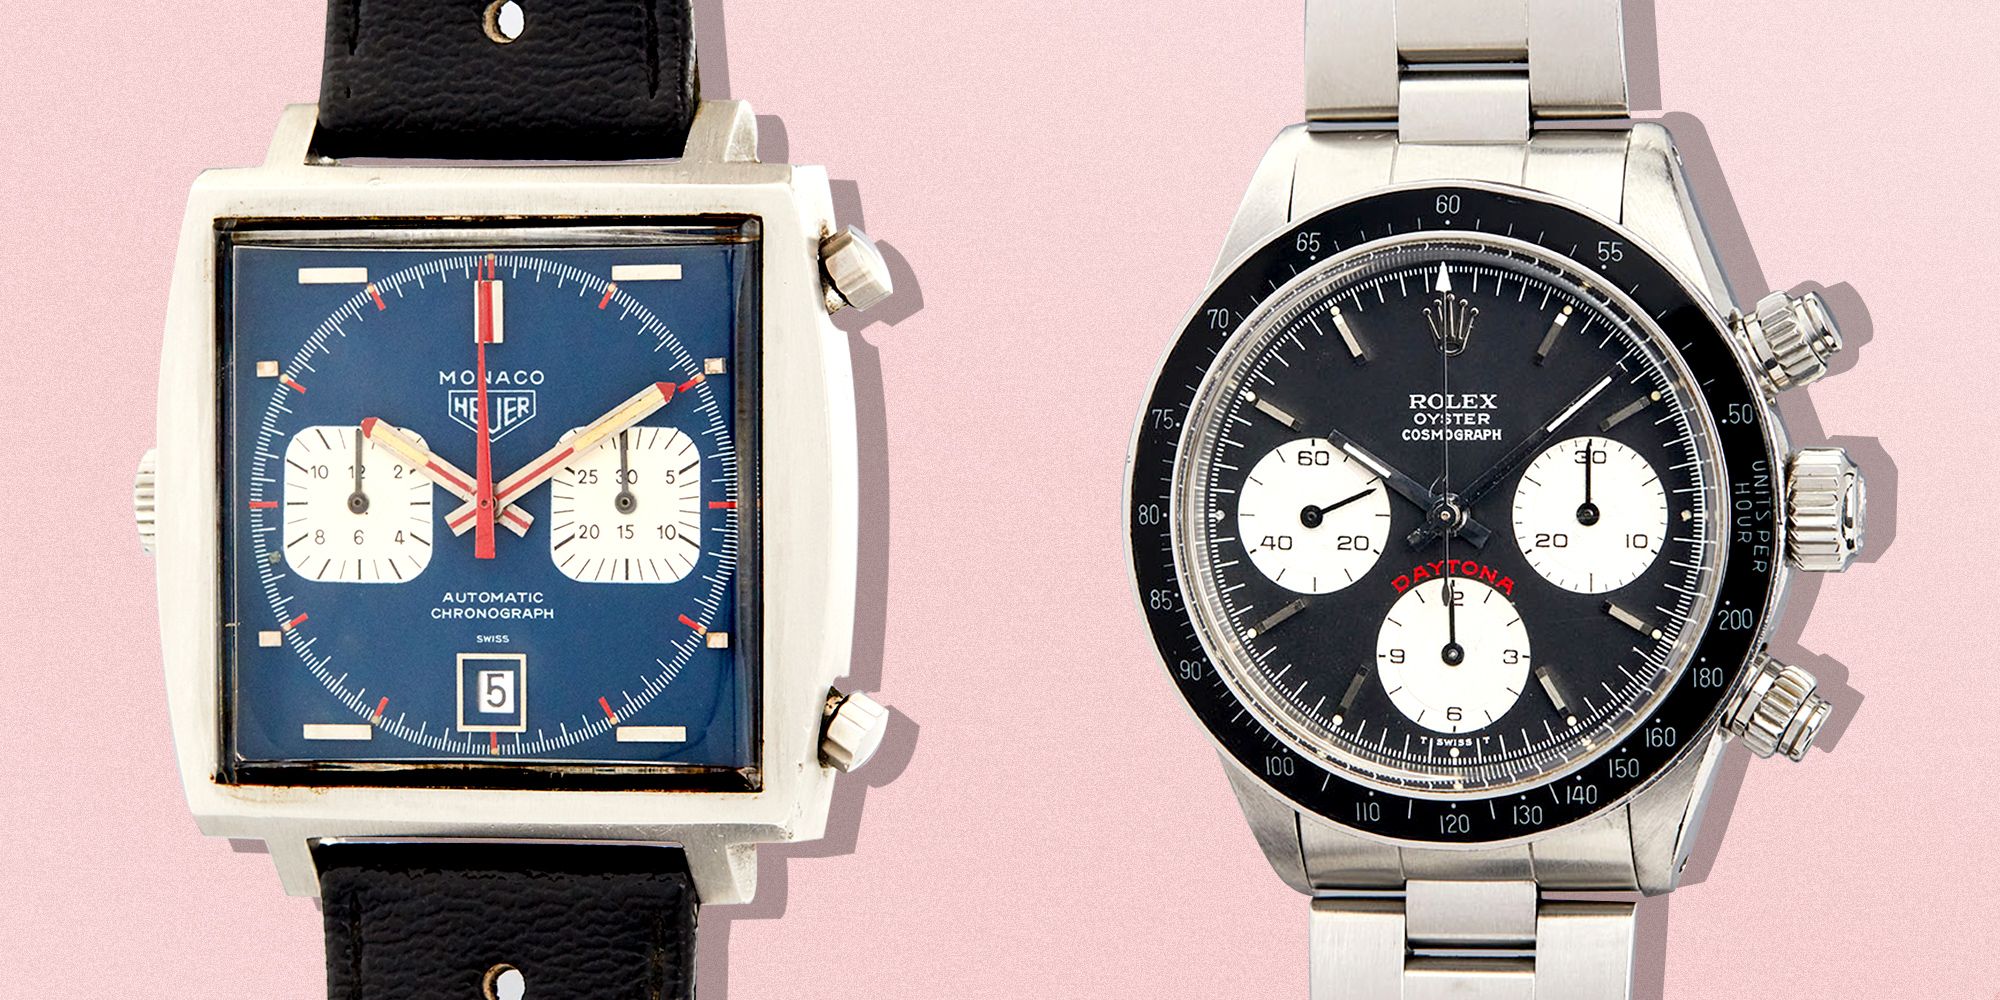 Rolex Daytona Are Going Up for Auction